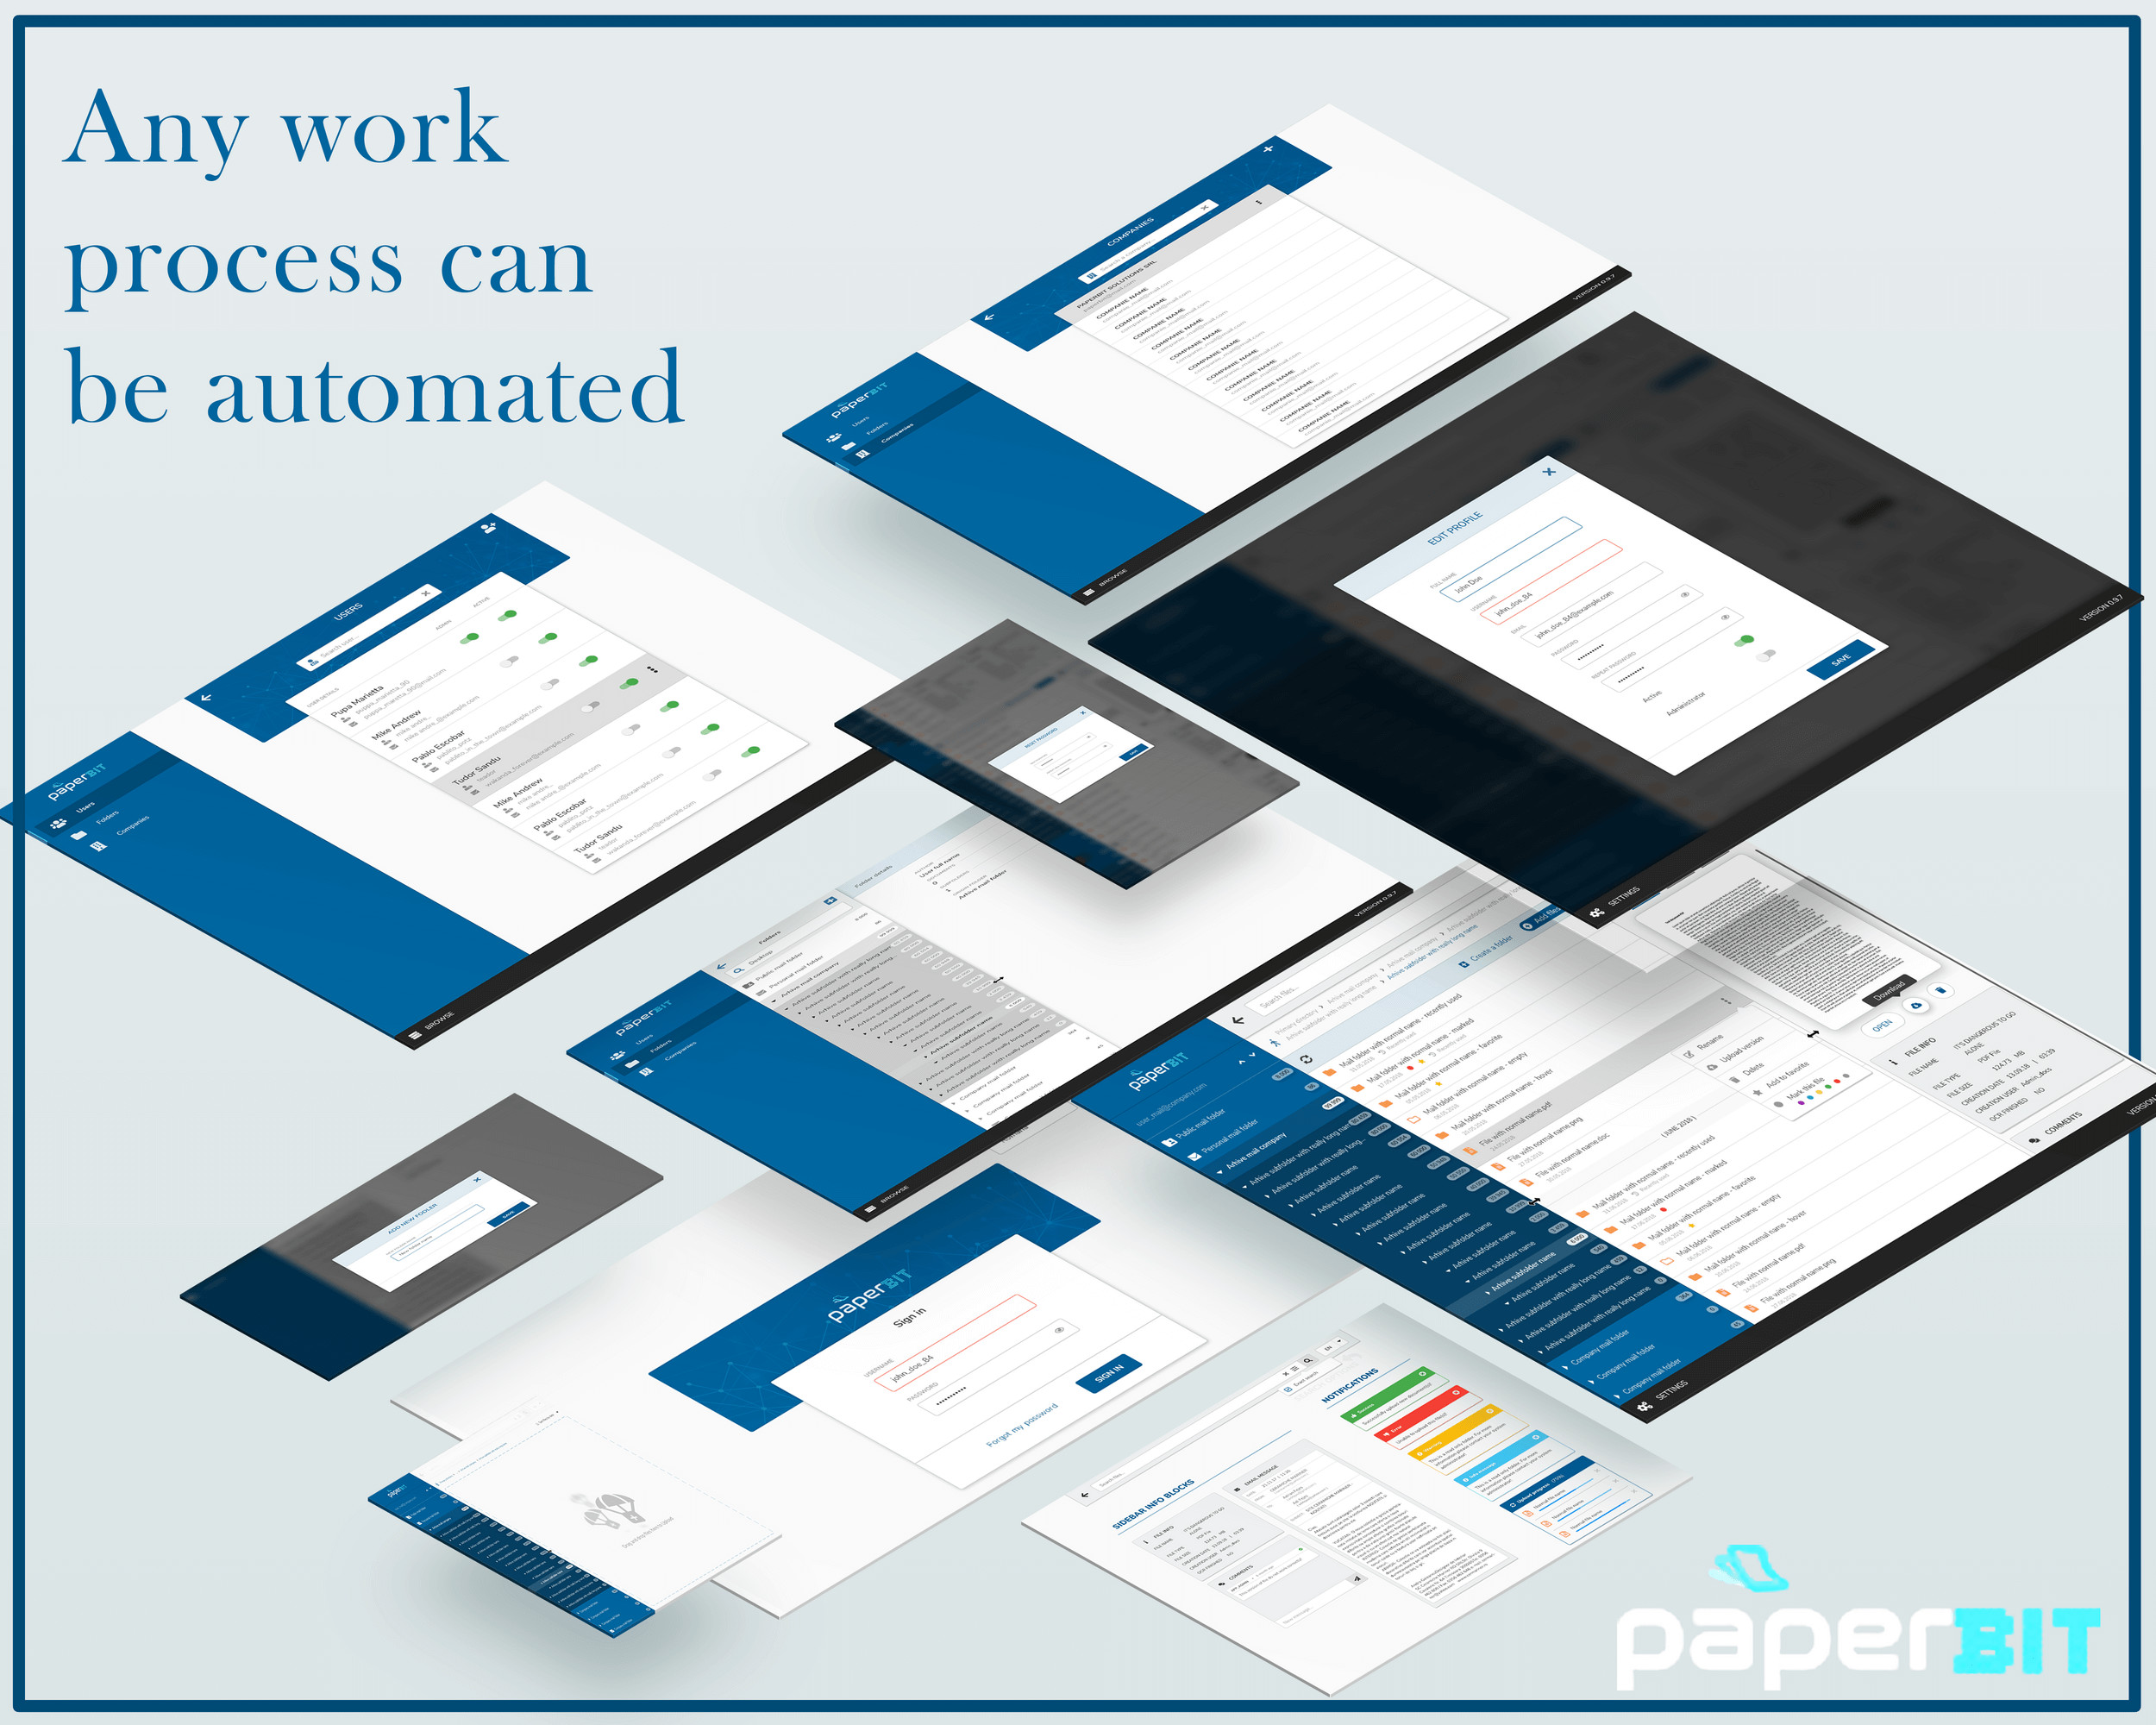 Preview image for Document Workflow Automation Platform